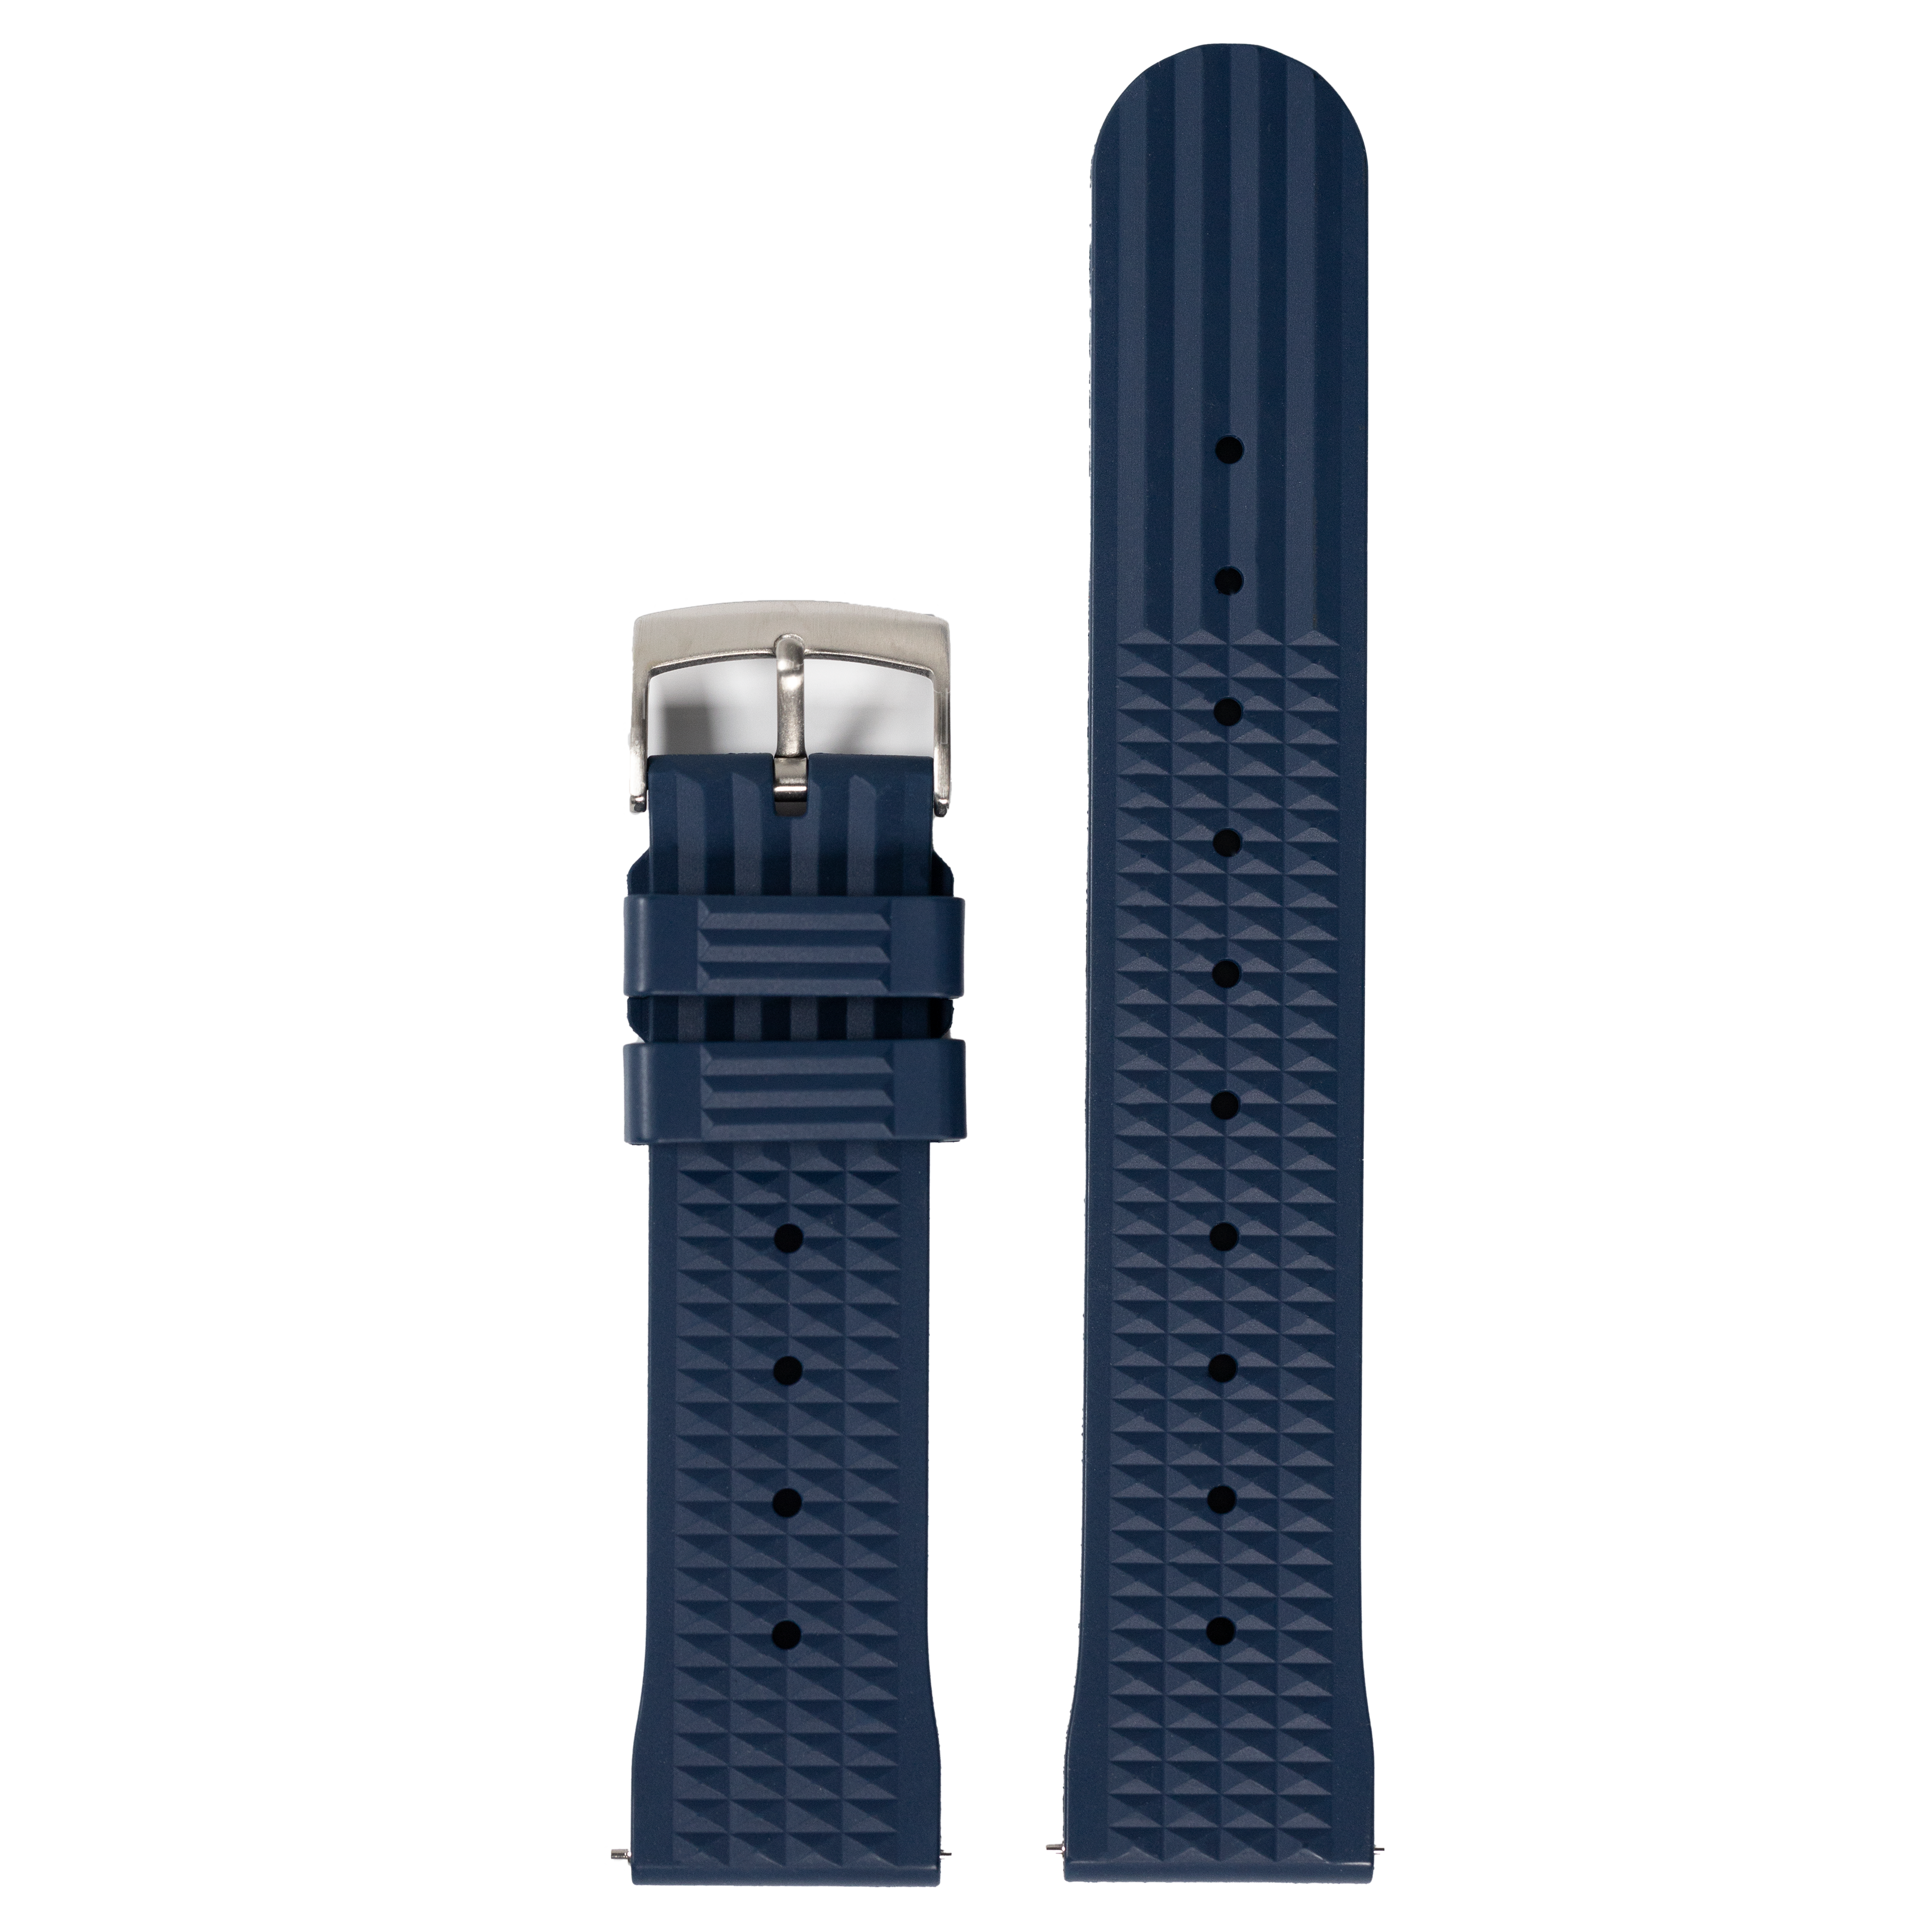 [QuickFit] King Waffle FKM Rubber - Navy Blue 22mm